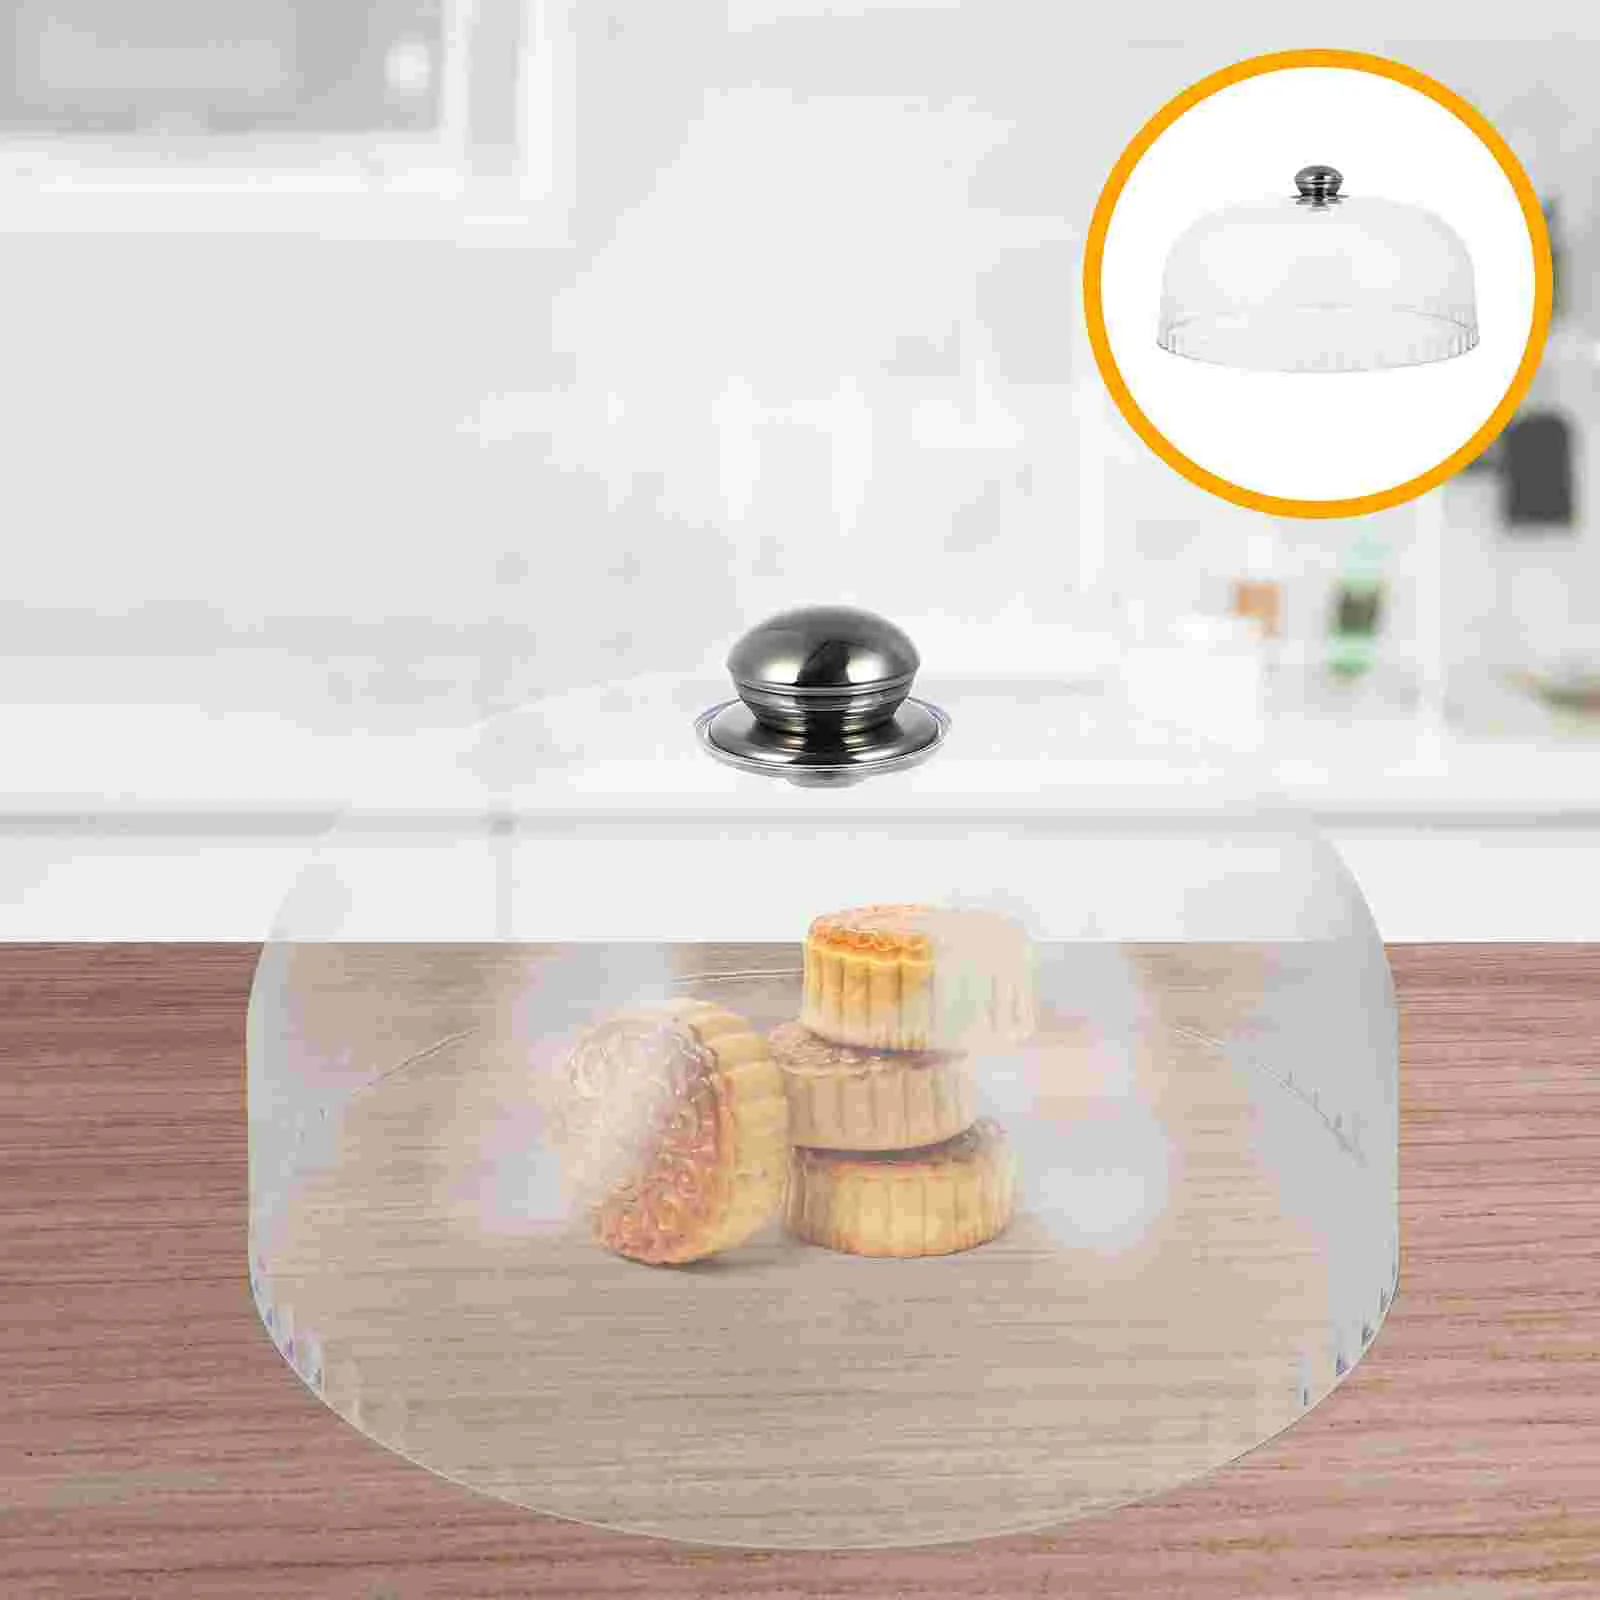 

Cake Stand Cake Dome Round Cover Clear Dessert Cheese Cloche Dome Cake Display Cover Food Protective Platter Cover Home Baking